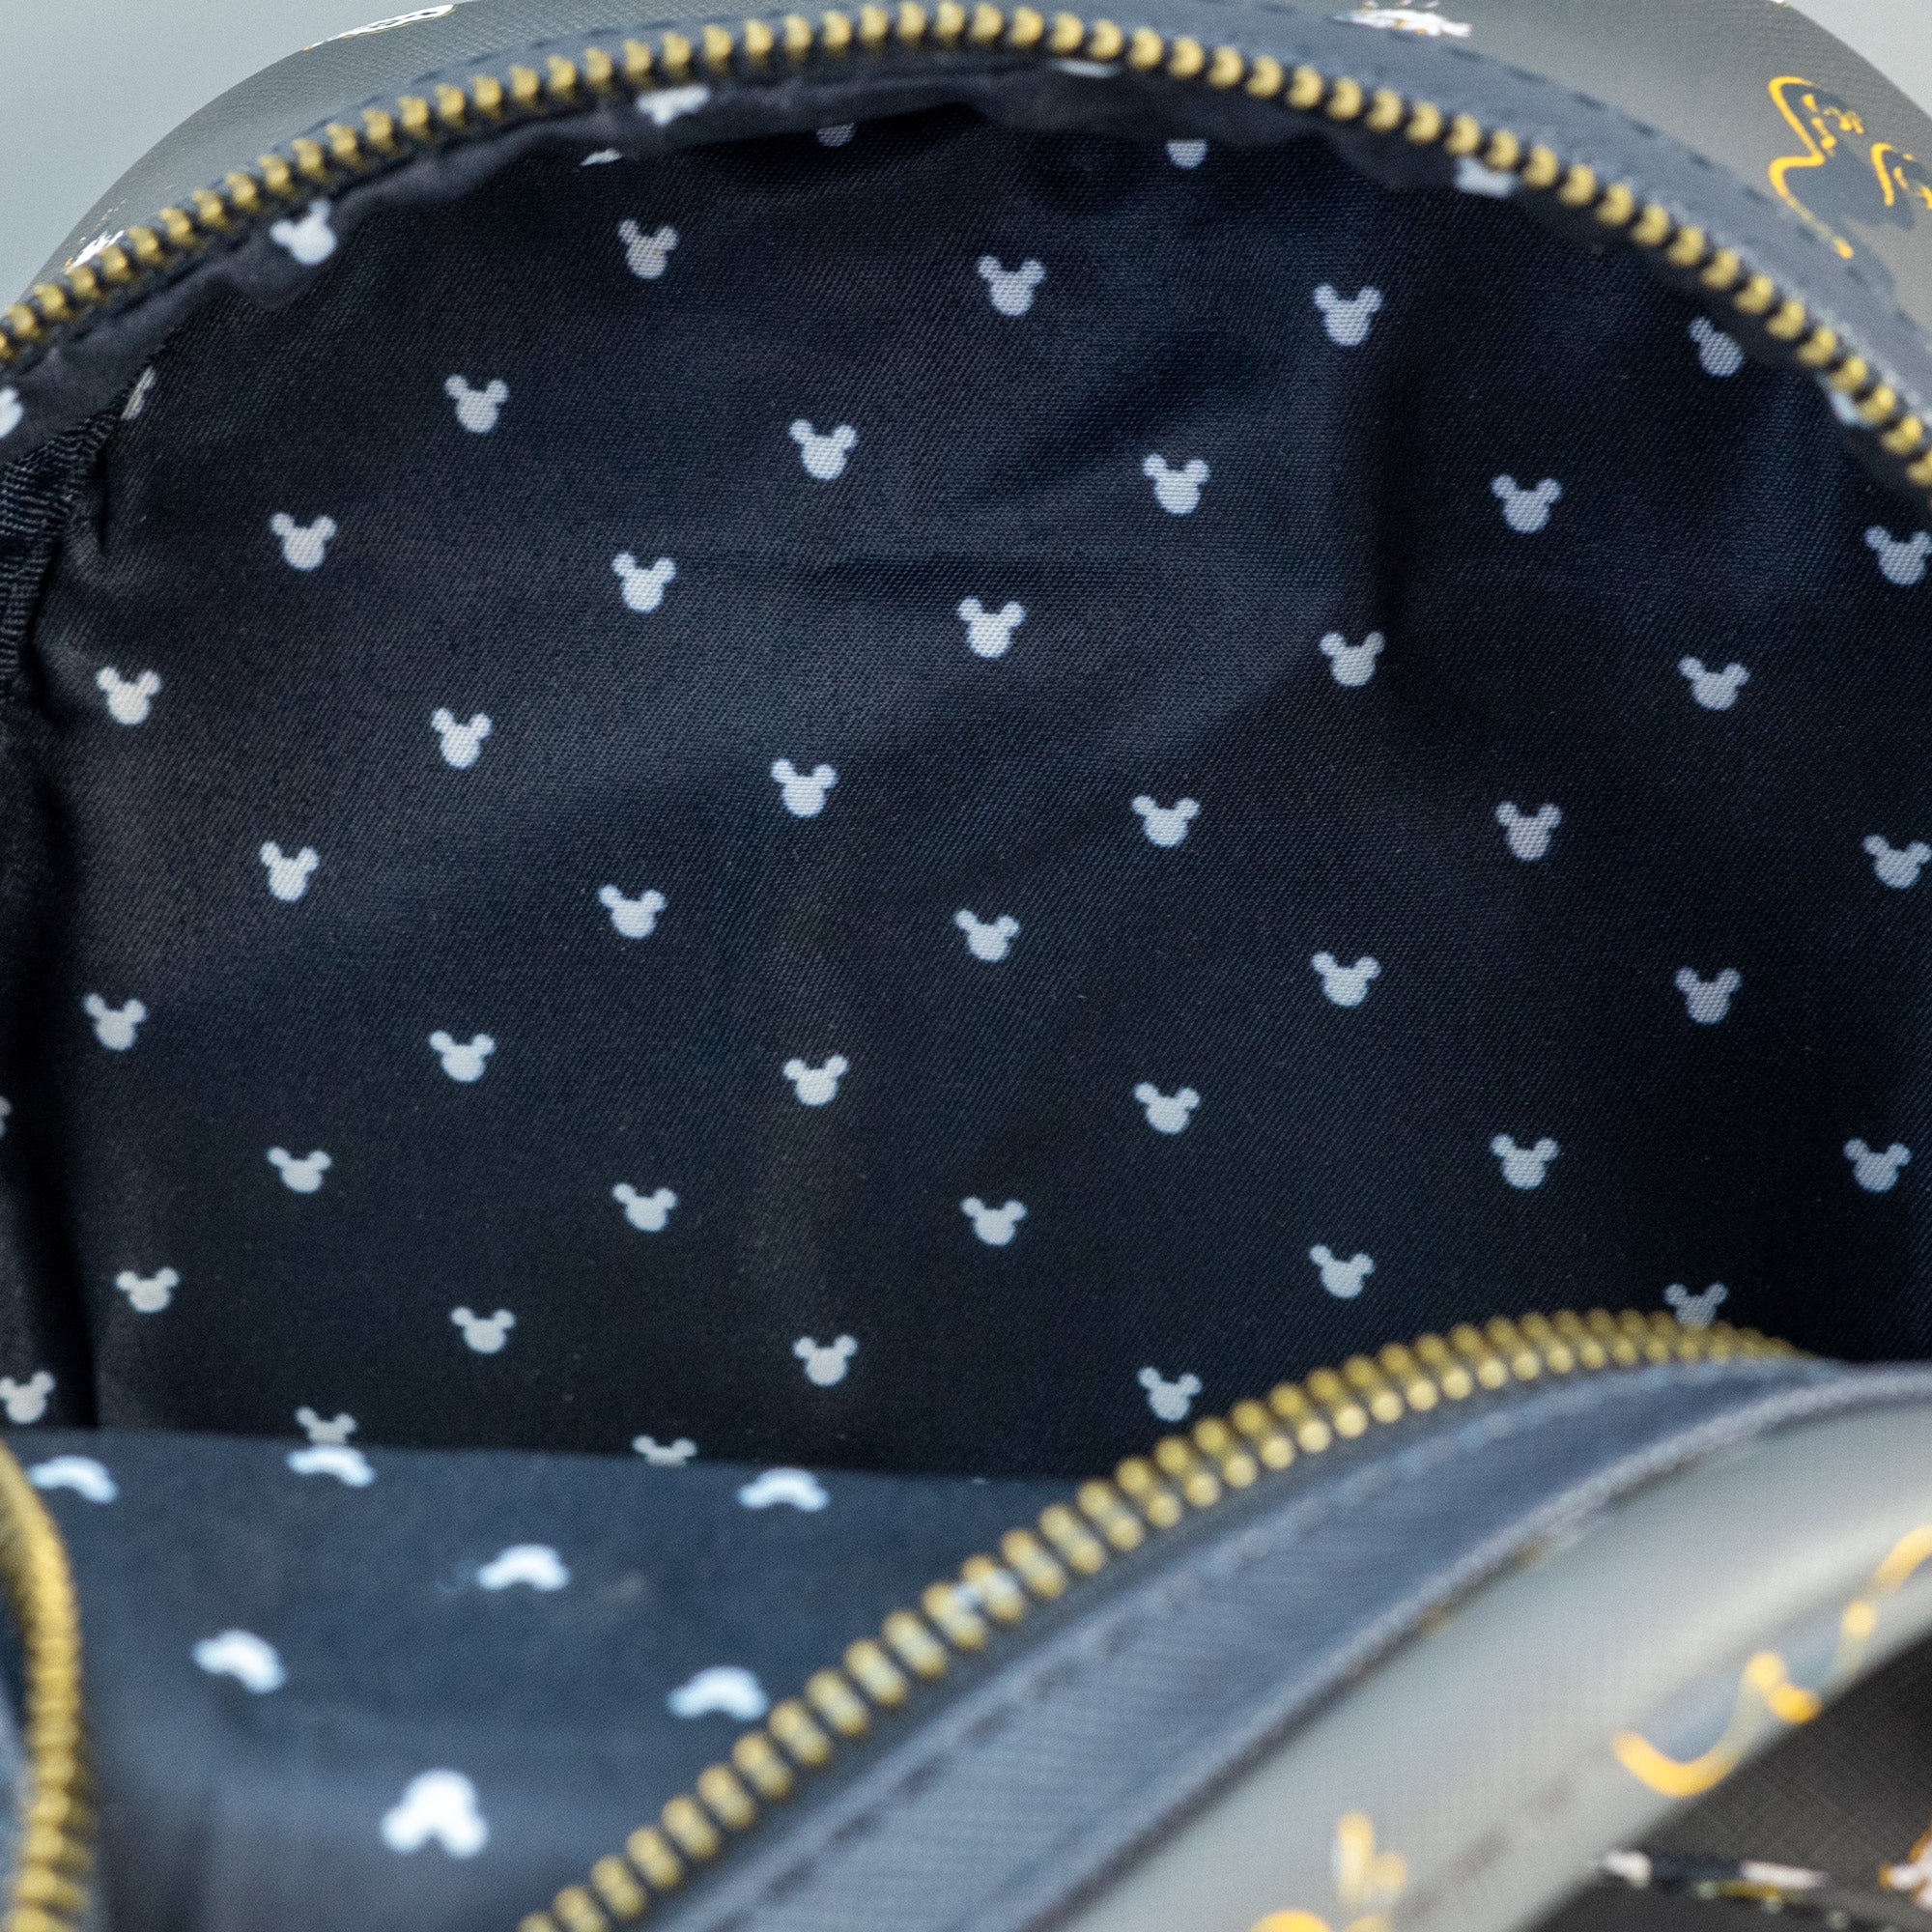 Loungefly x Disney Spooked Mickey All Over Print Mini Backpack - GeekCore